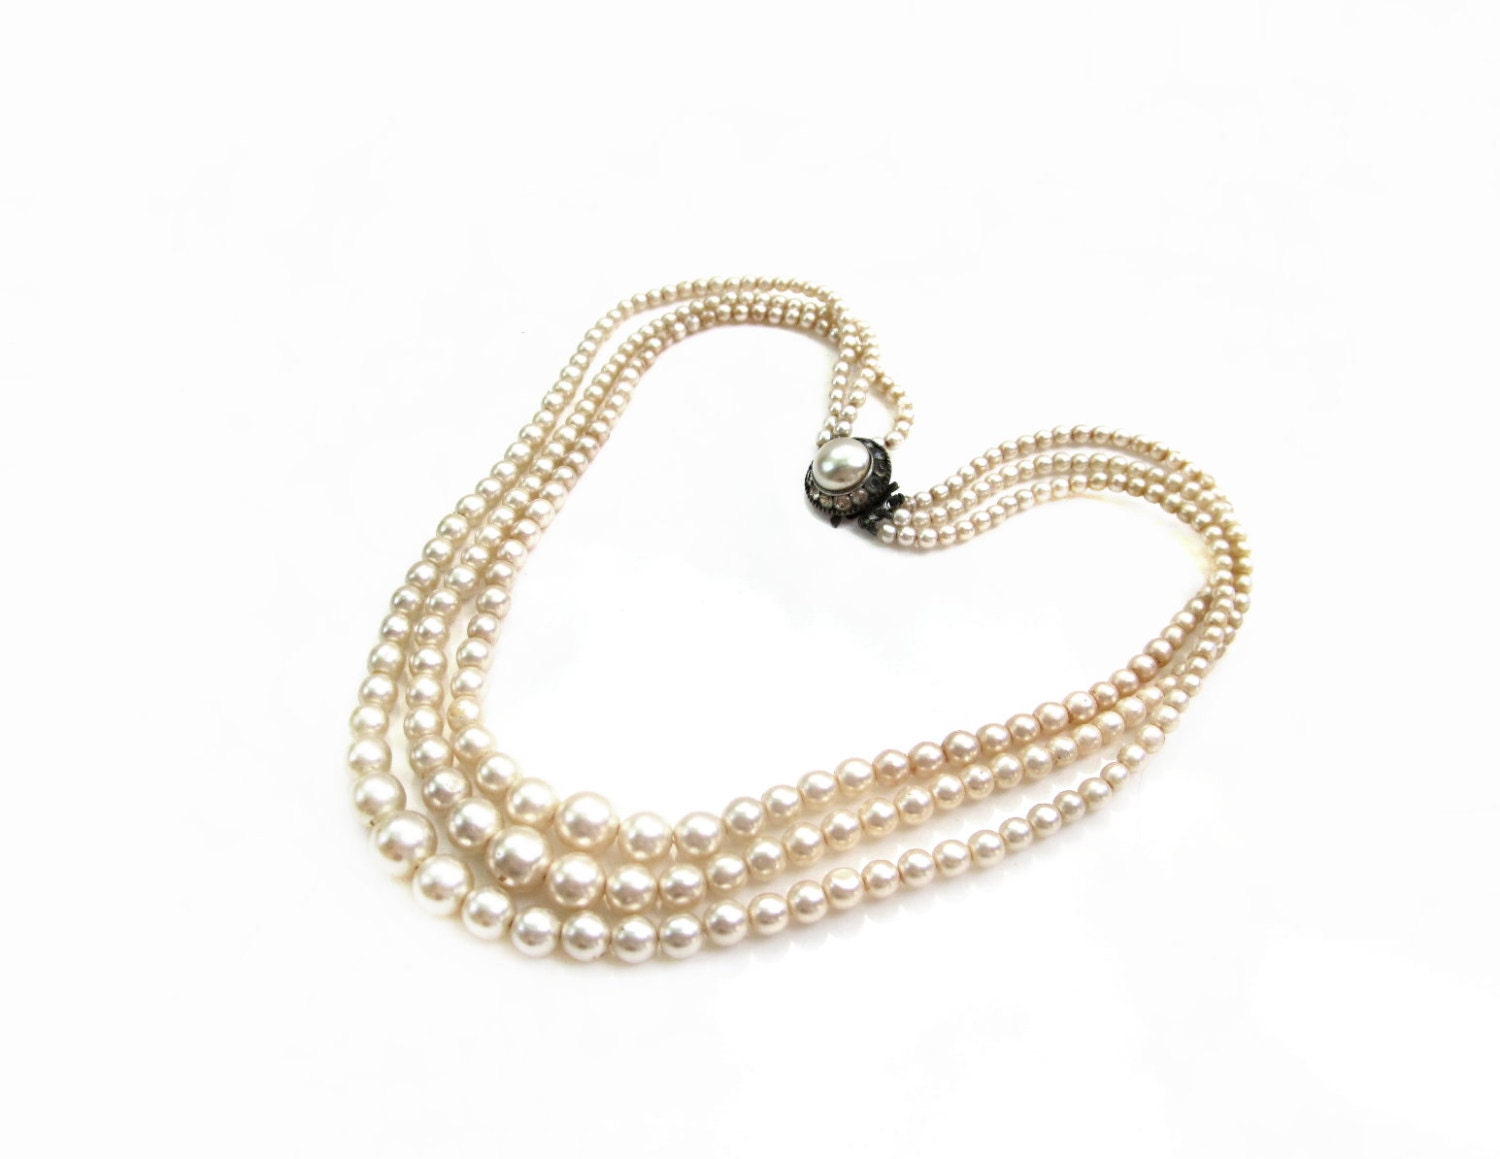 Vintage Ivory Glass Pearl Bead Necklace Rhinestone Clasp